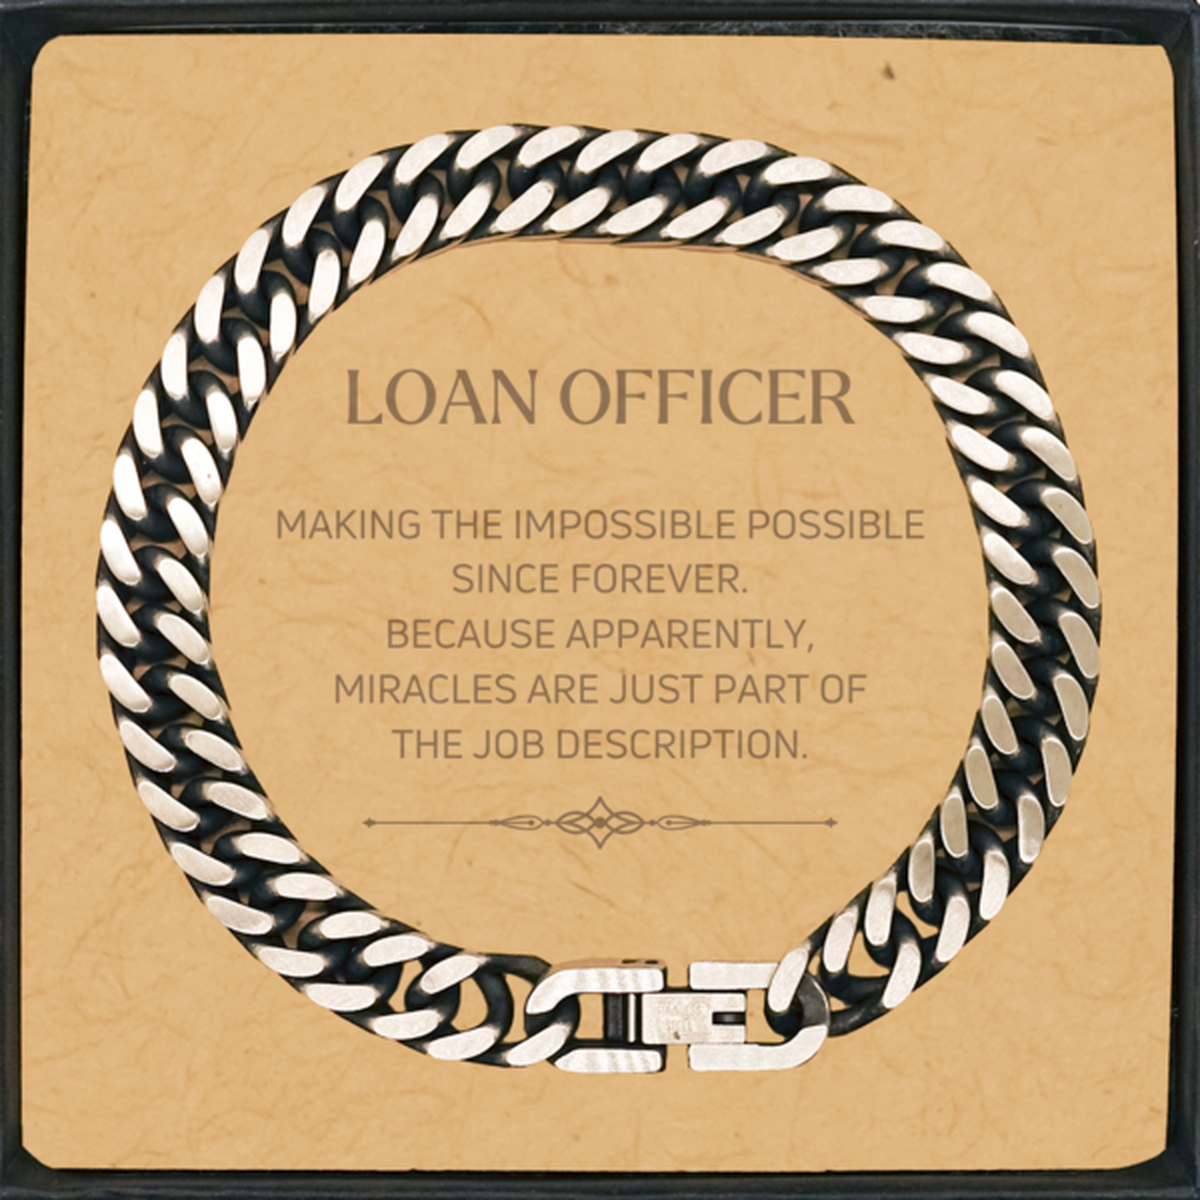 Funny Loan Officer Gifts, Miracles are just part of the job description, Inspirational Birthday Cuban Link Chain Bracelet For Loan Officer, Men, Women, Coworkers, Friends, Boss